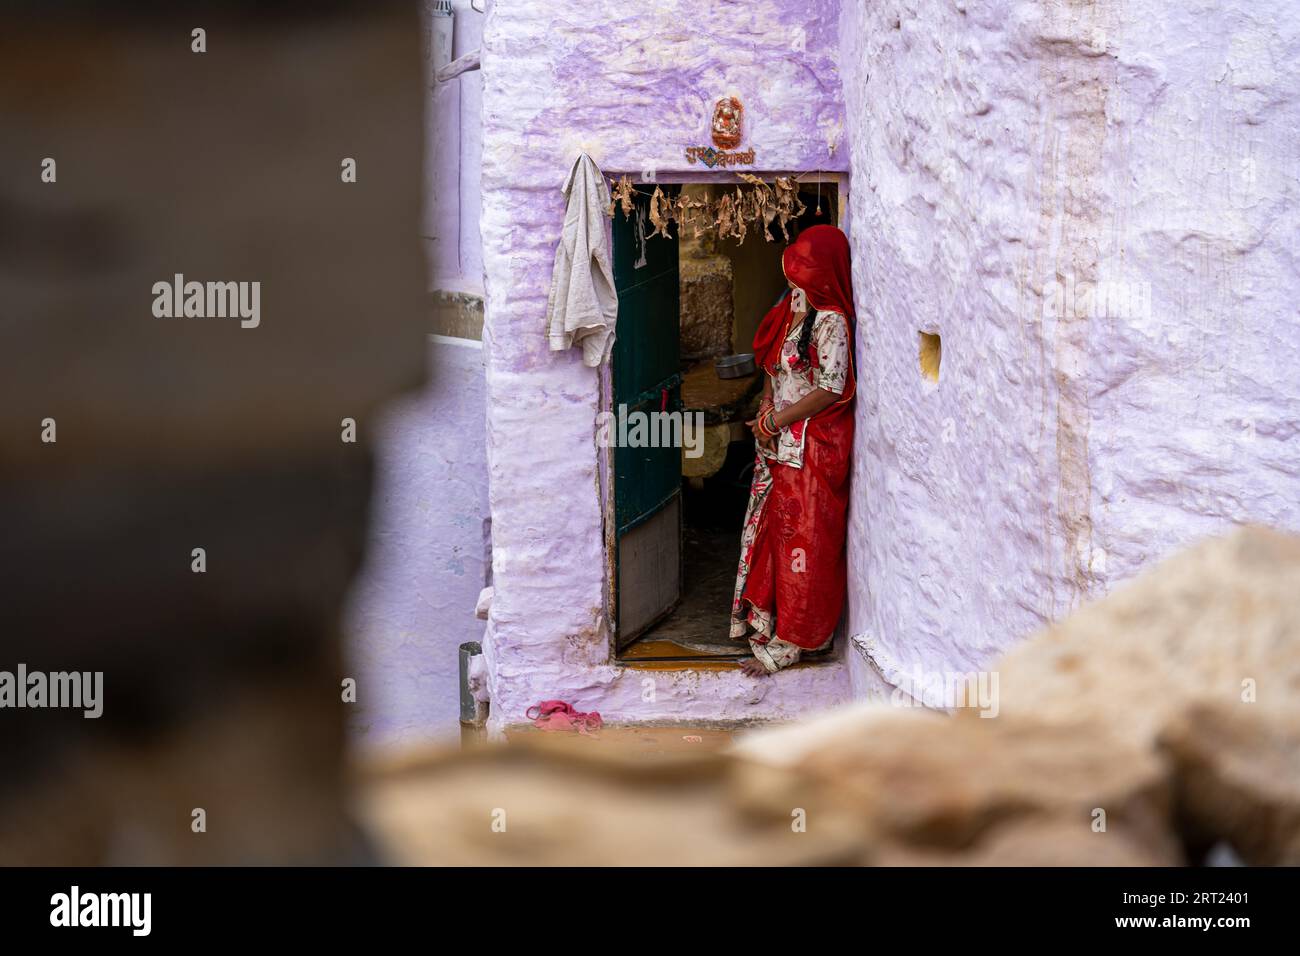 Jaisalemer, India, December 5, 2019: An Indian woman in colorful clothes standing in front her house Stock Photo